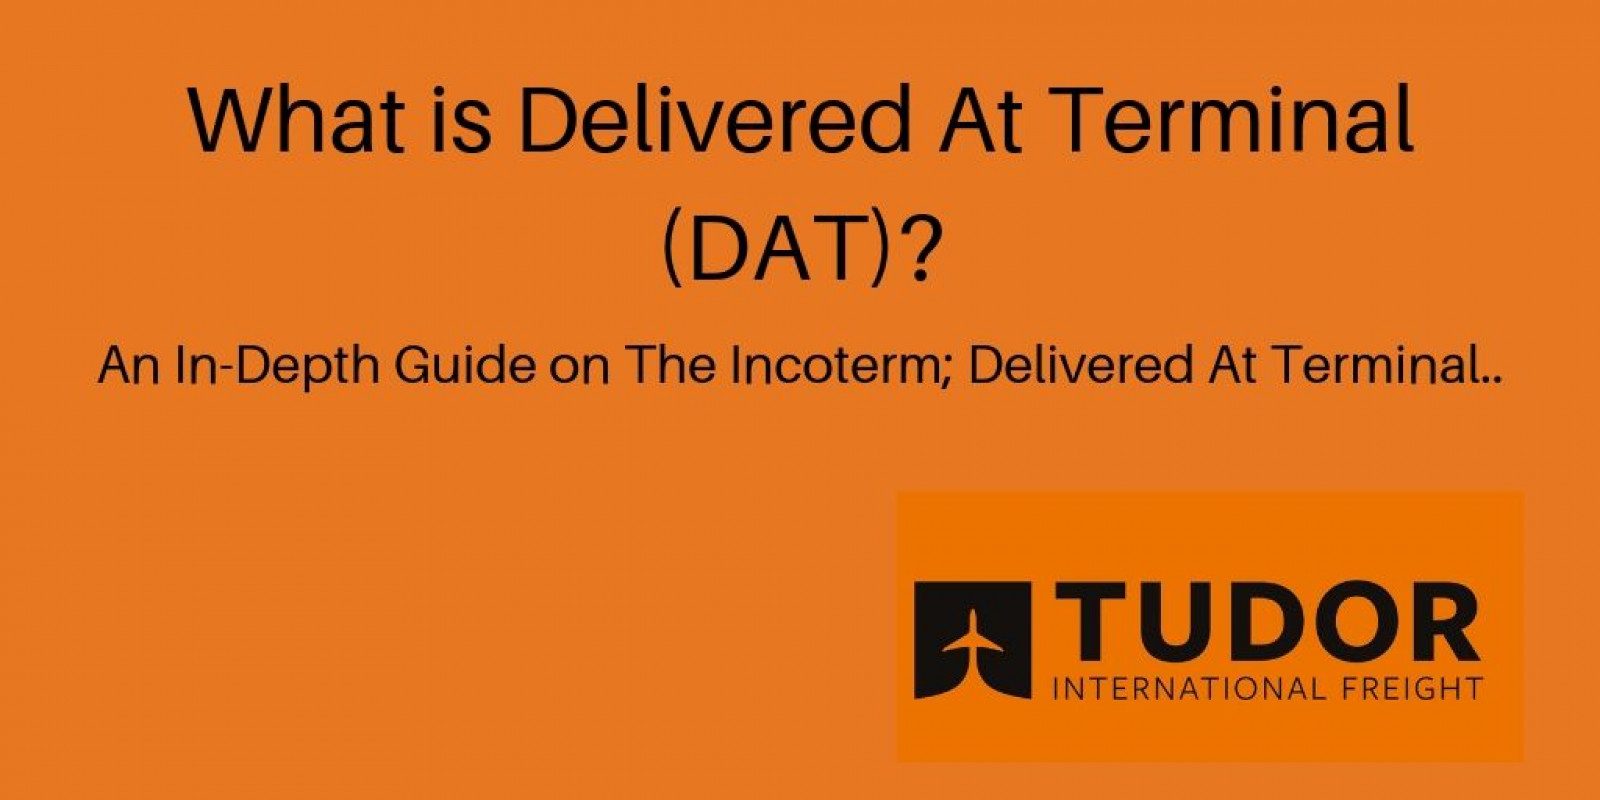 What is Delivered At Terminal (DAT)?